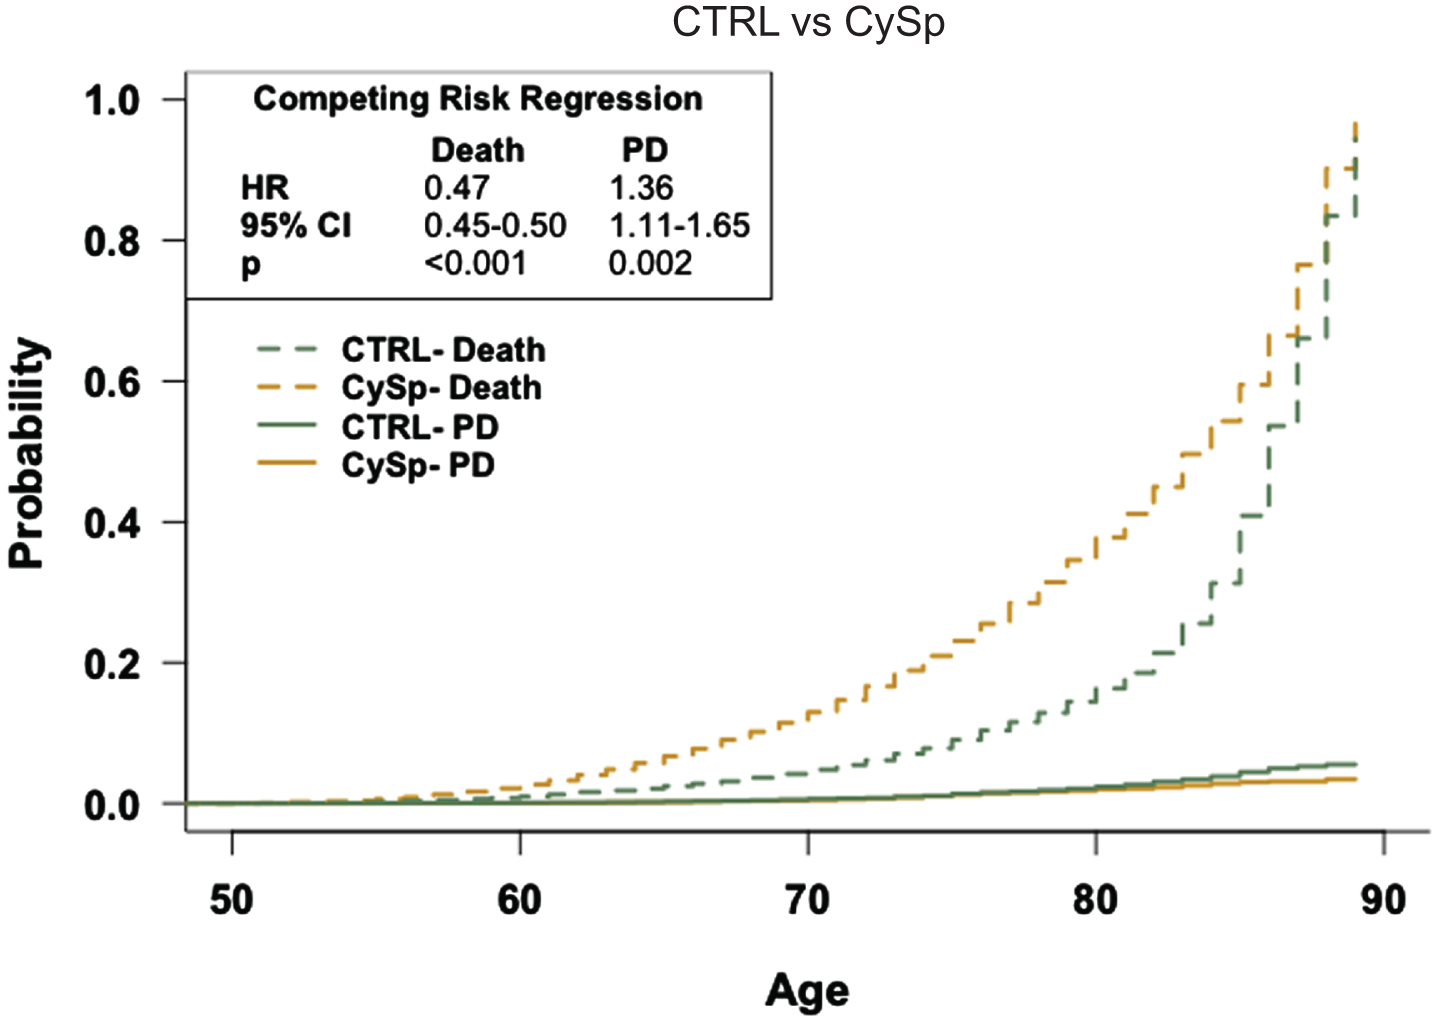 The general population has an increased risk of Parkinson’s disease compared to patients prescribed cyclosporine. Competing risk regression analysis of PD and death between patients prescribed cyclosporine or in the general population-like control. Patients in the general population-like control have an increased risk of PD but a decreased risk of death. n = 18,038 patients/cohort *CRR, competing risk regression; HR, hazard ratio; CI, confidence interval.